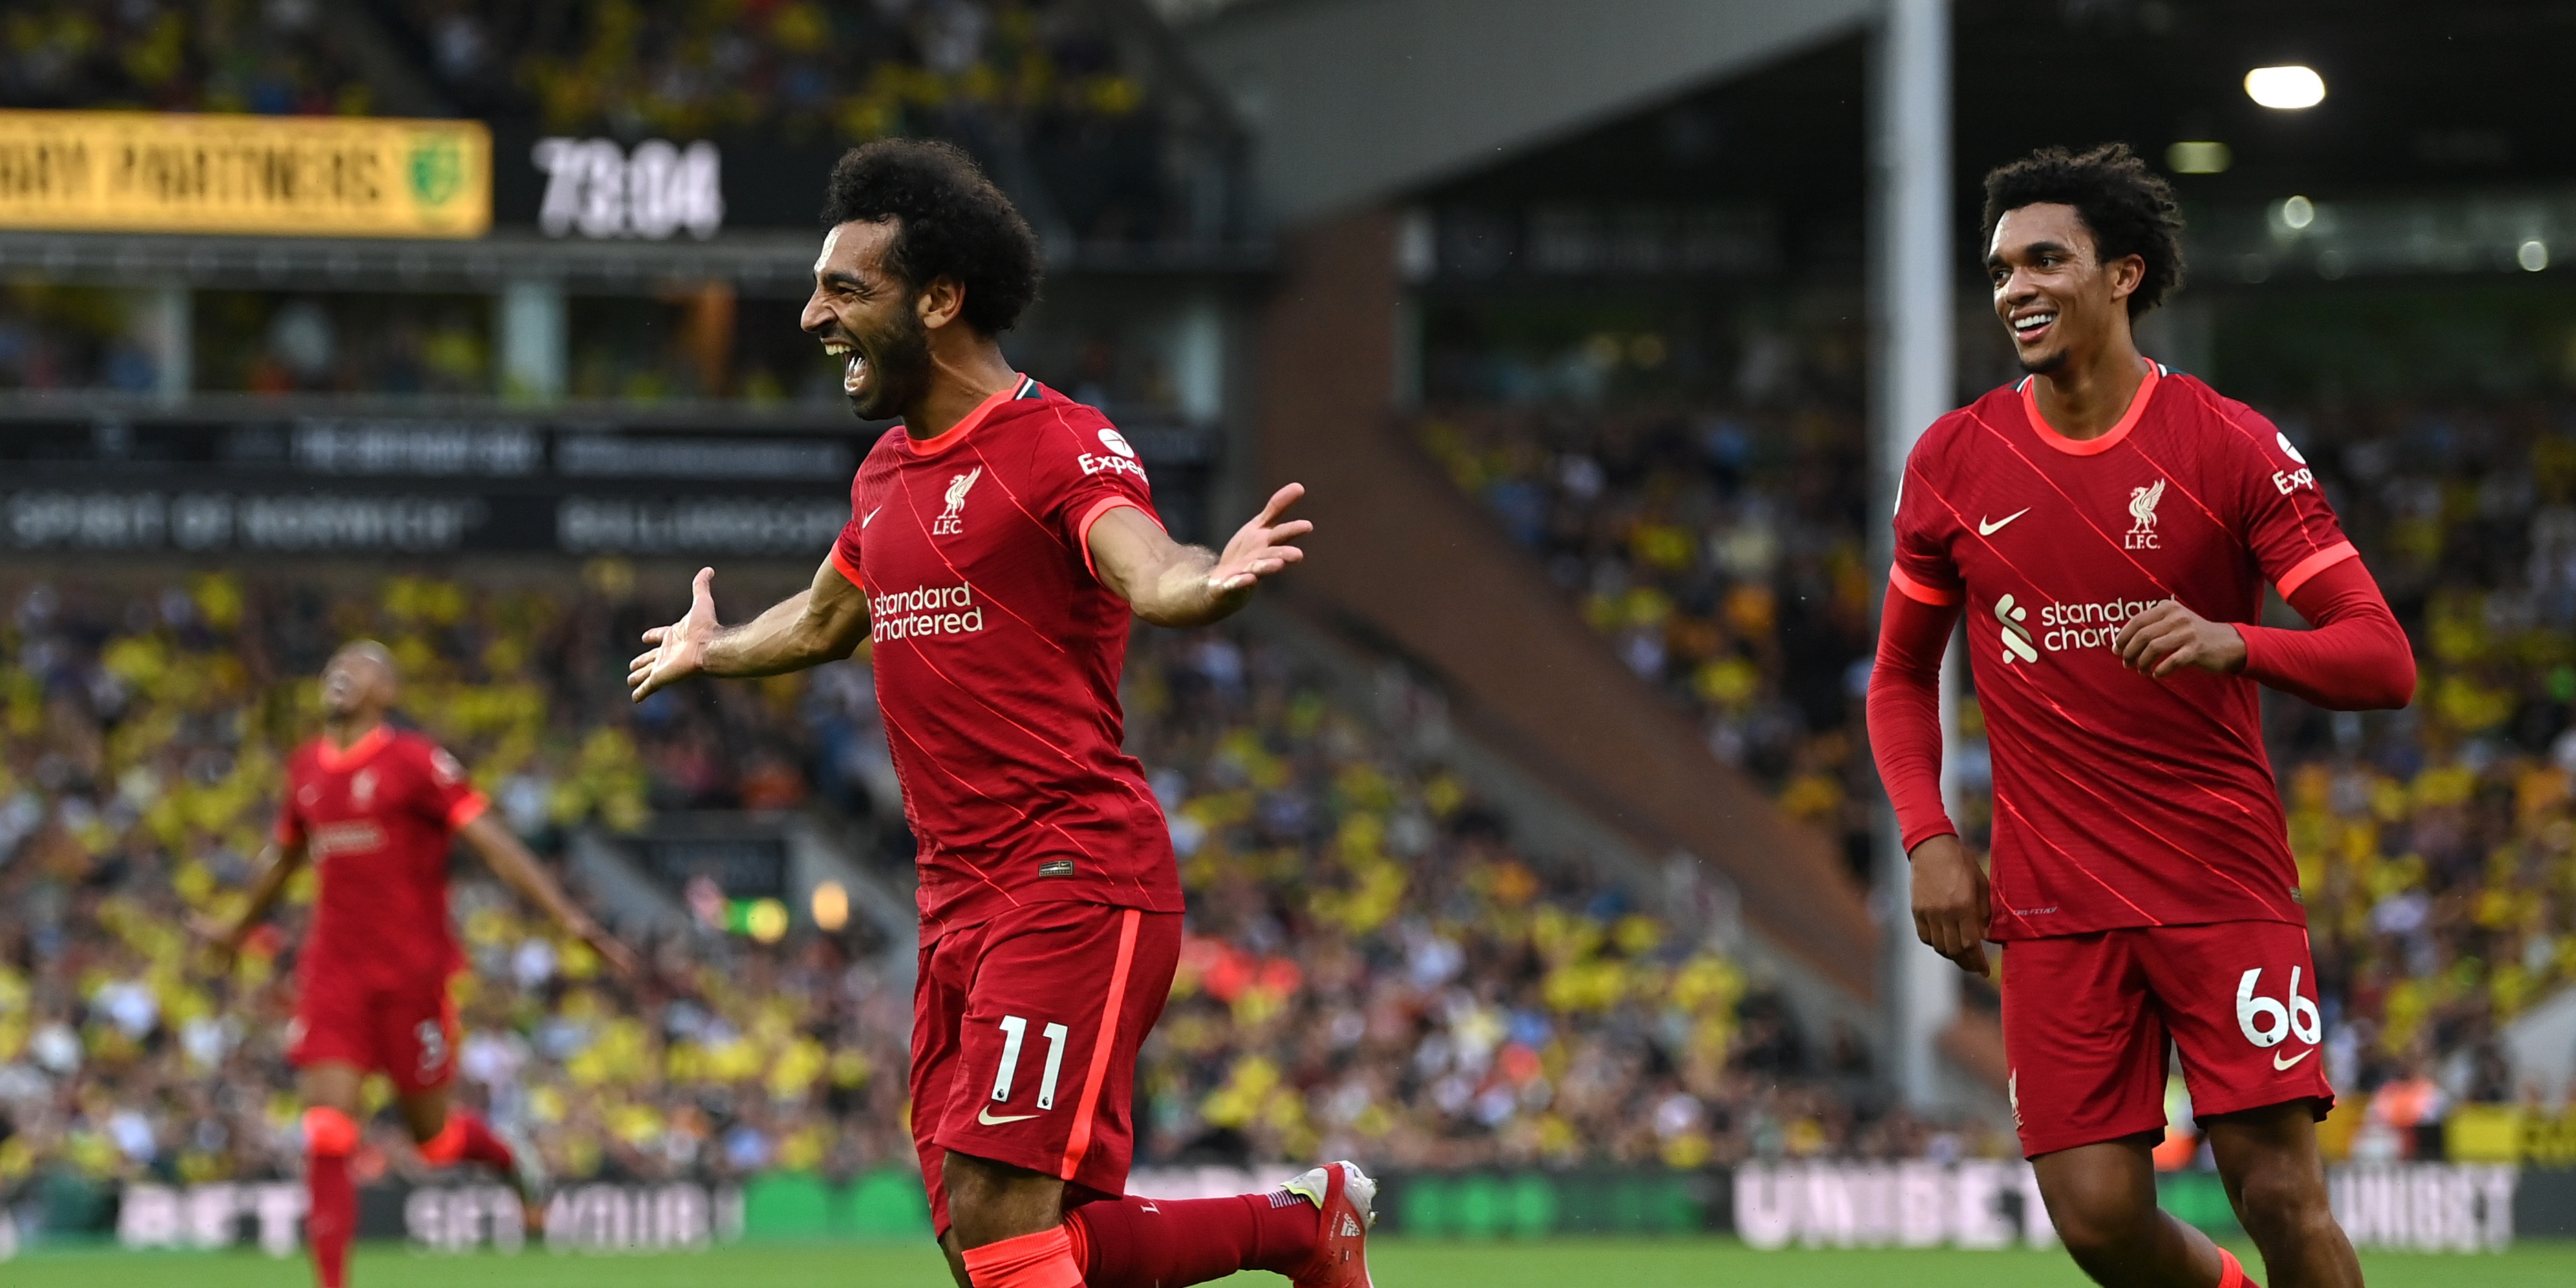 ‘Very hard to replace’ – Ex-Liverpool man weighs in on Mo Salah’s contract situation as Egyptian King nears the final 12 months of his Anfield deal